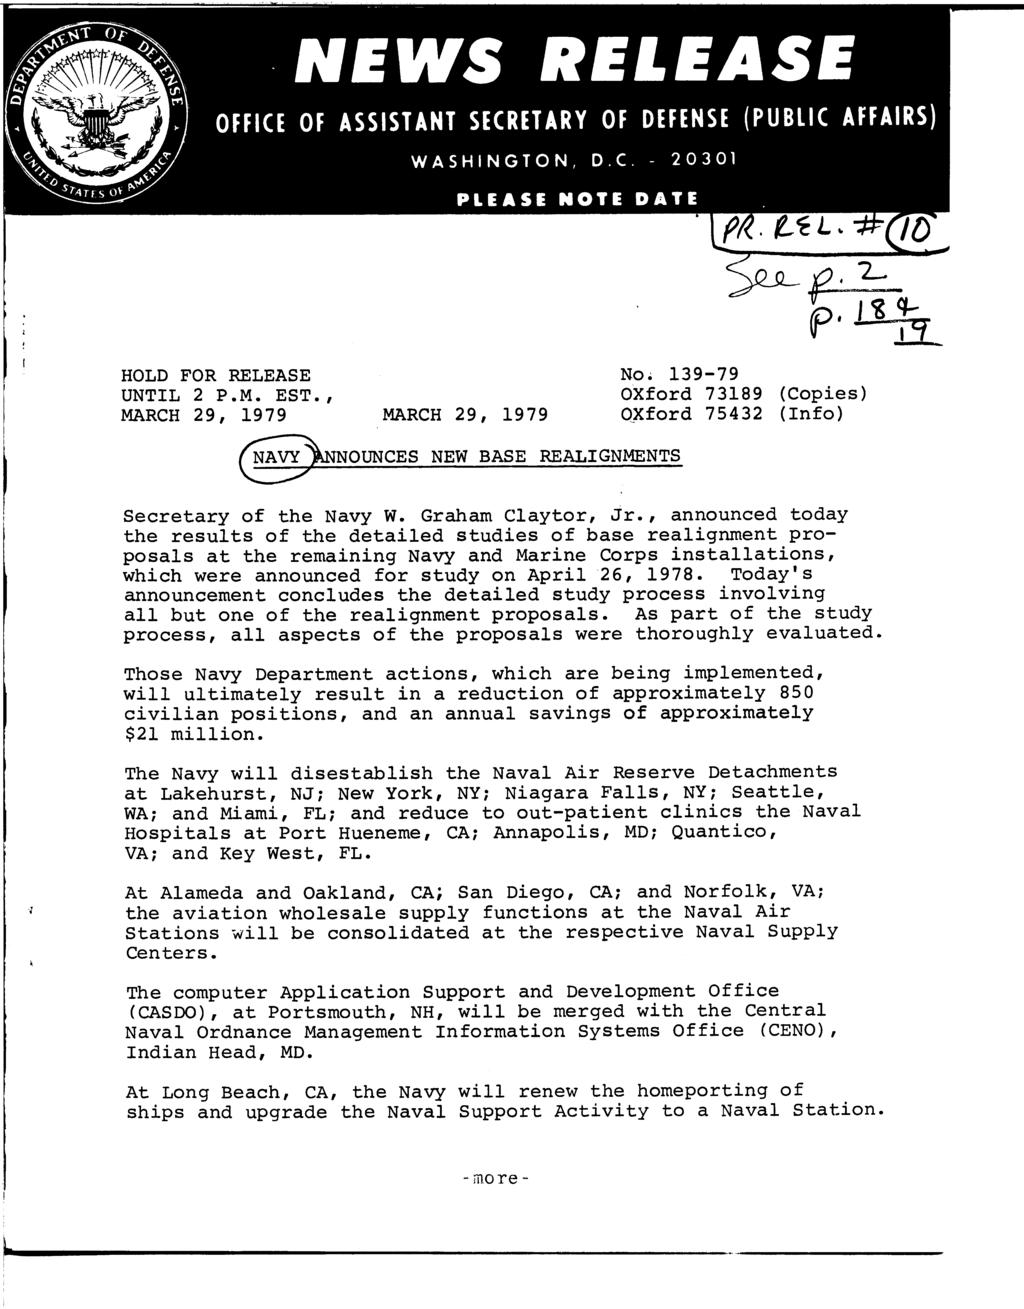 NEWS RELEASE OFFICE OF ASSISTANT SECRETARY OF DEFENSE (PUBLIC AFFAIRS) WASHINGTON, D.C 20301 PLEASE NOTE DATE HOLD FOR RELEASE UNTIL 2 P.M. EST., MARCH 29, 1979 MARCH 29, 1979 No.